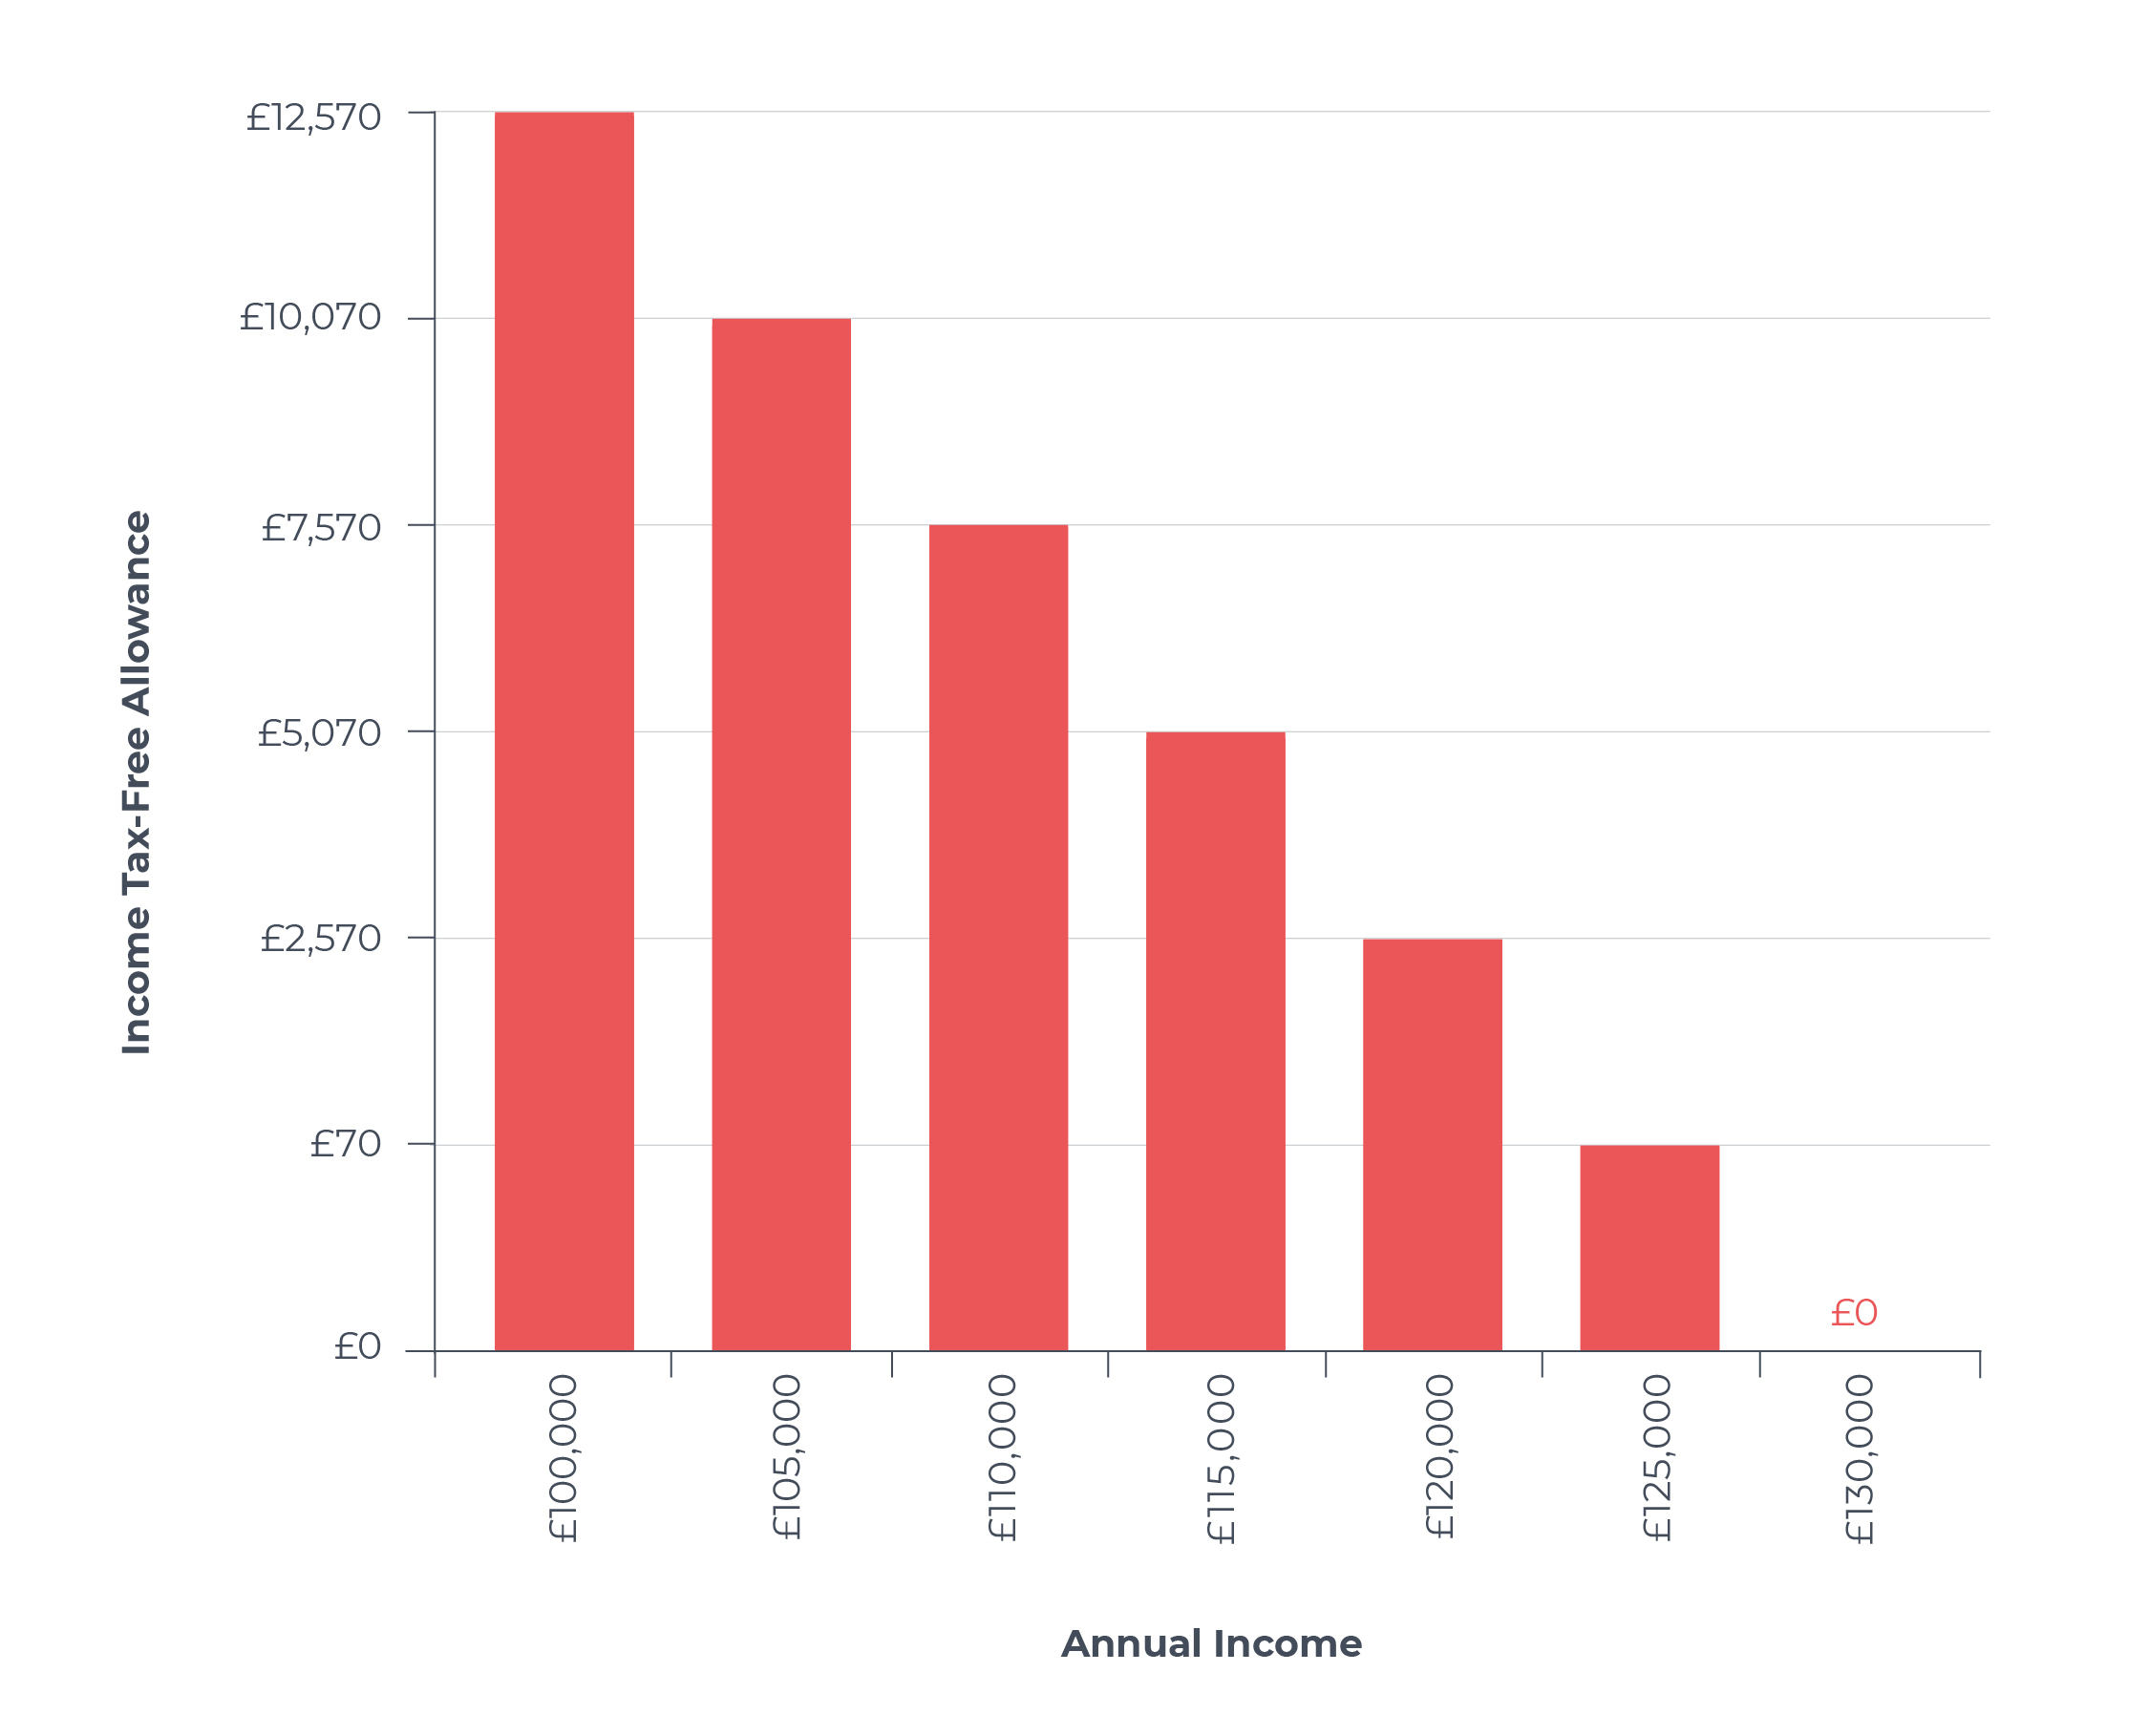 GCV bar graph showing taper feature of UK income tax free allowance for high earners